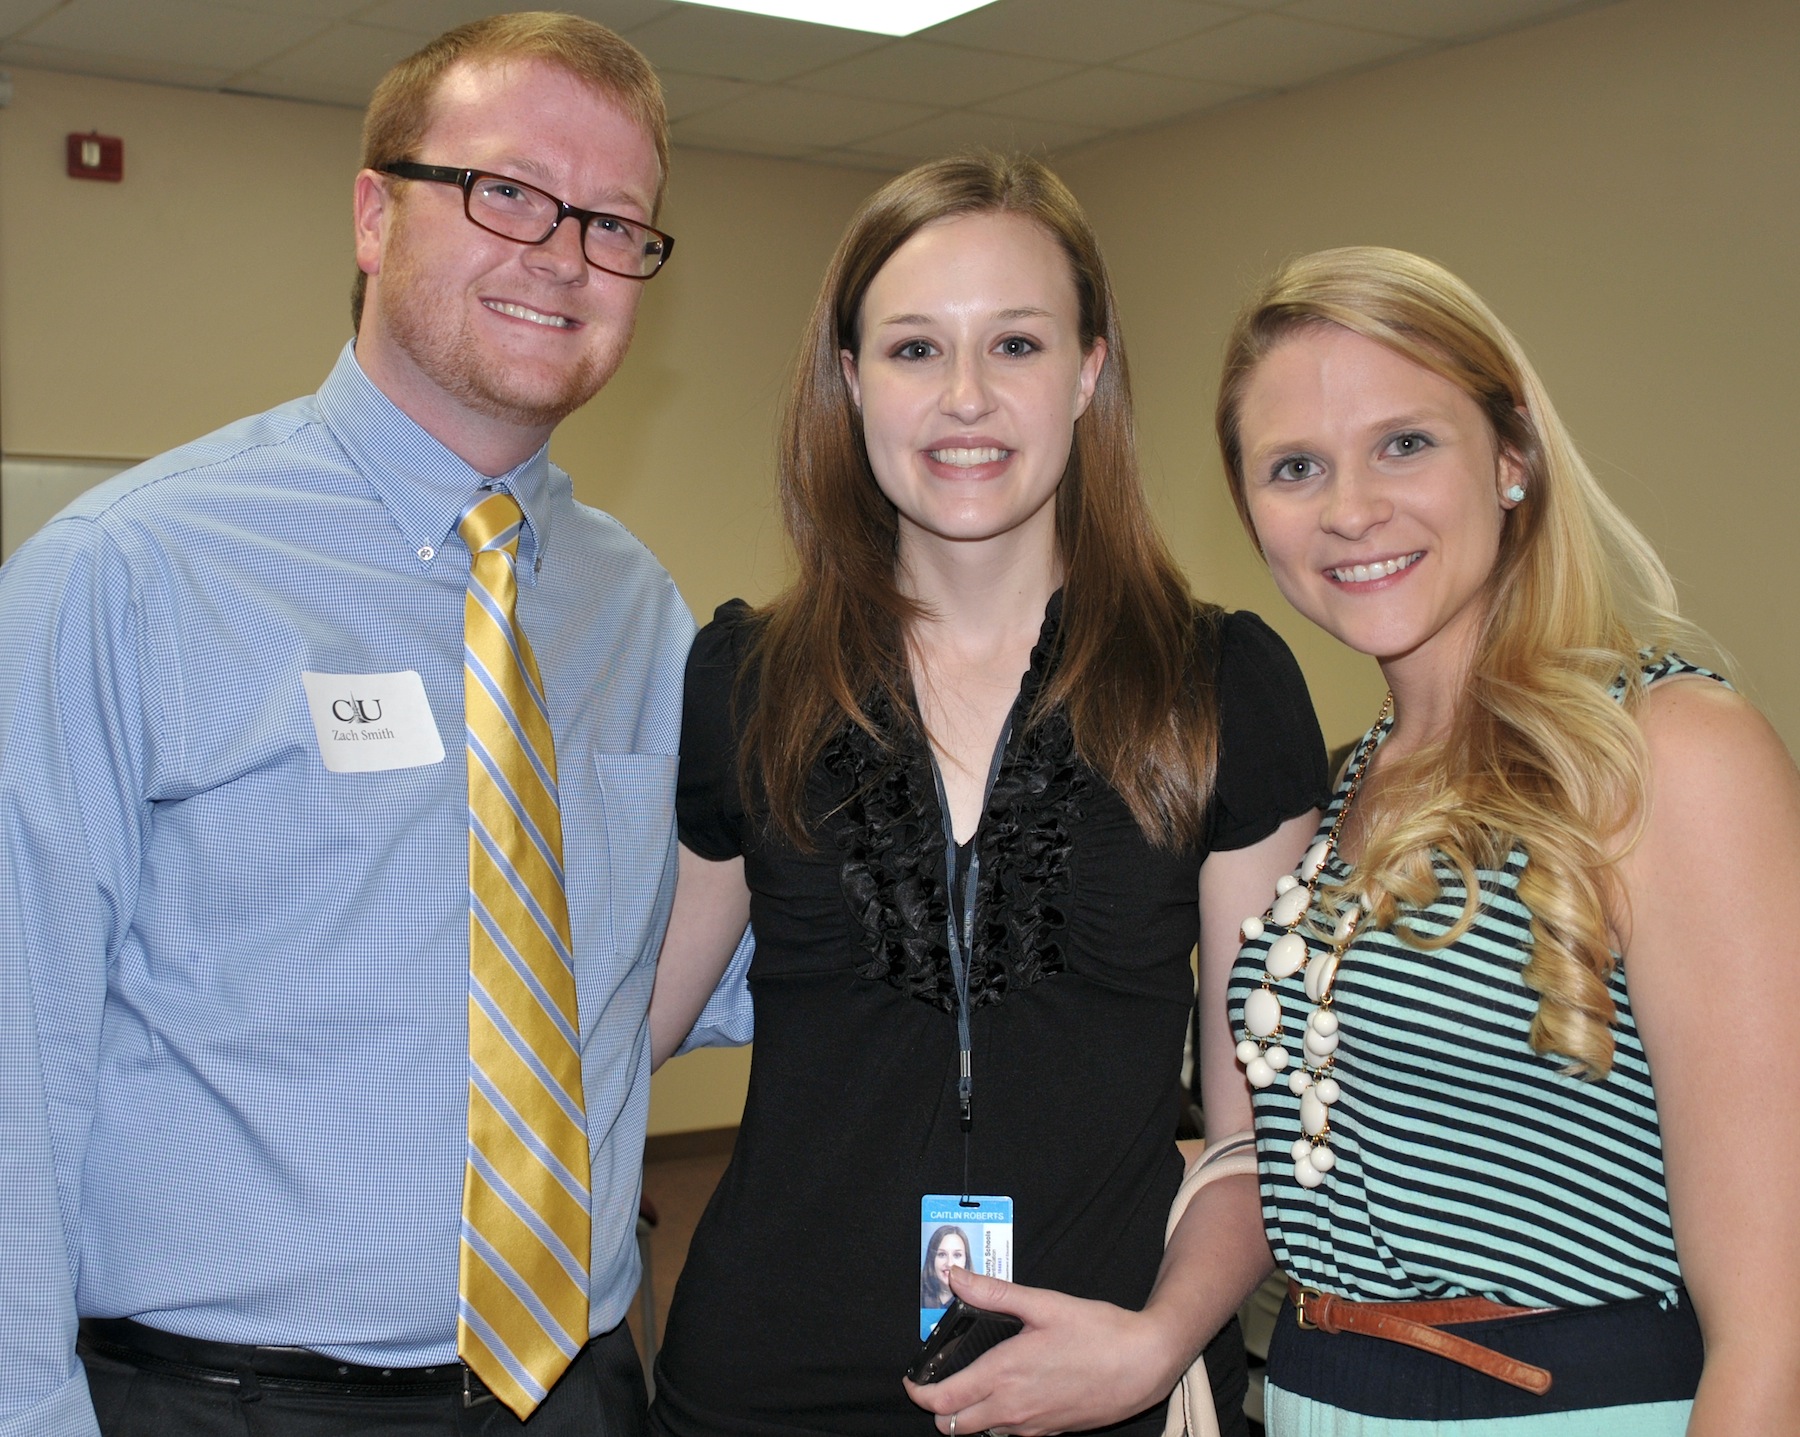 CU alumni in attendance at the May 8 Campaign dinner were, from left: Zach Smith, left, a 2013 graduate and admissions counselor; with his sister Cait Roberts, center, and Megan Massey who was her roommate and 2010 fellow graduate. (Campbellsville University Photo by Linda Waggener)